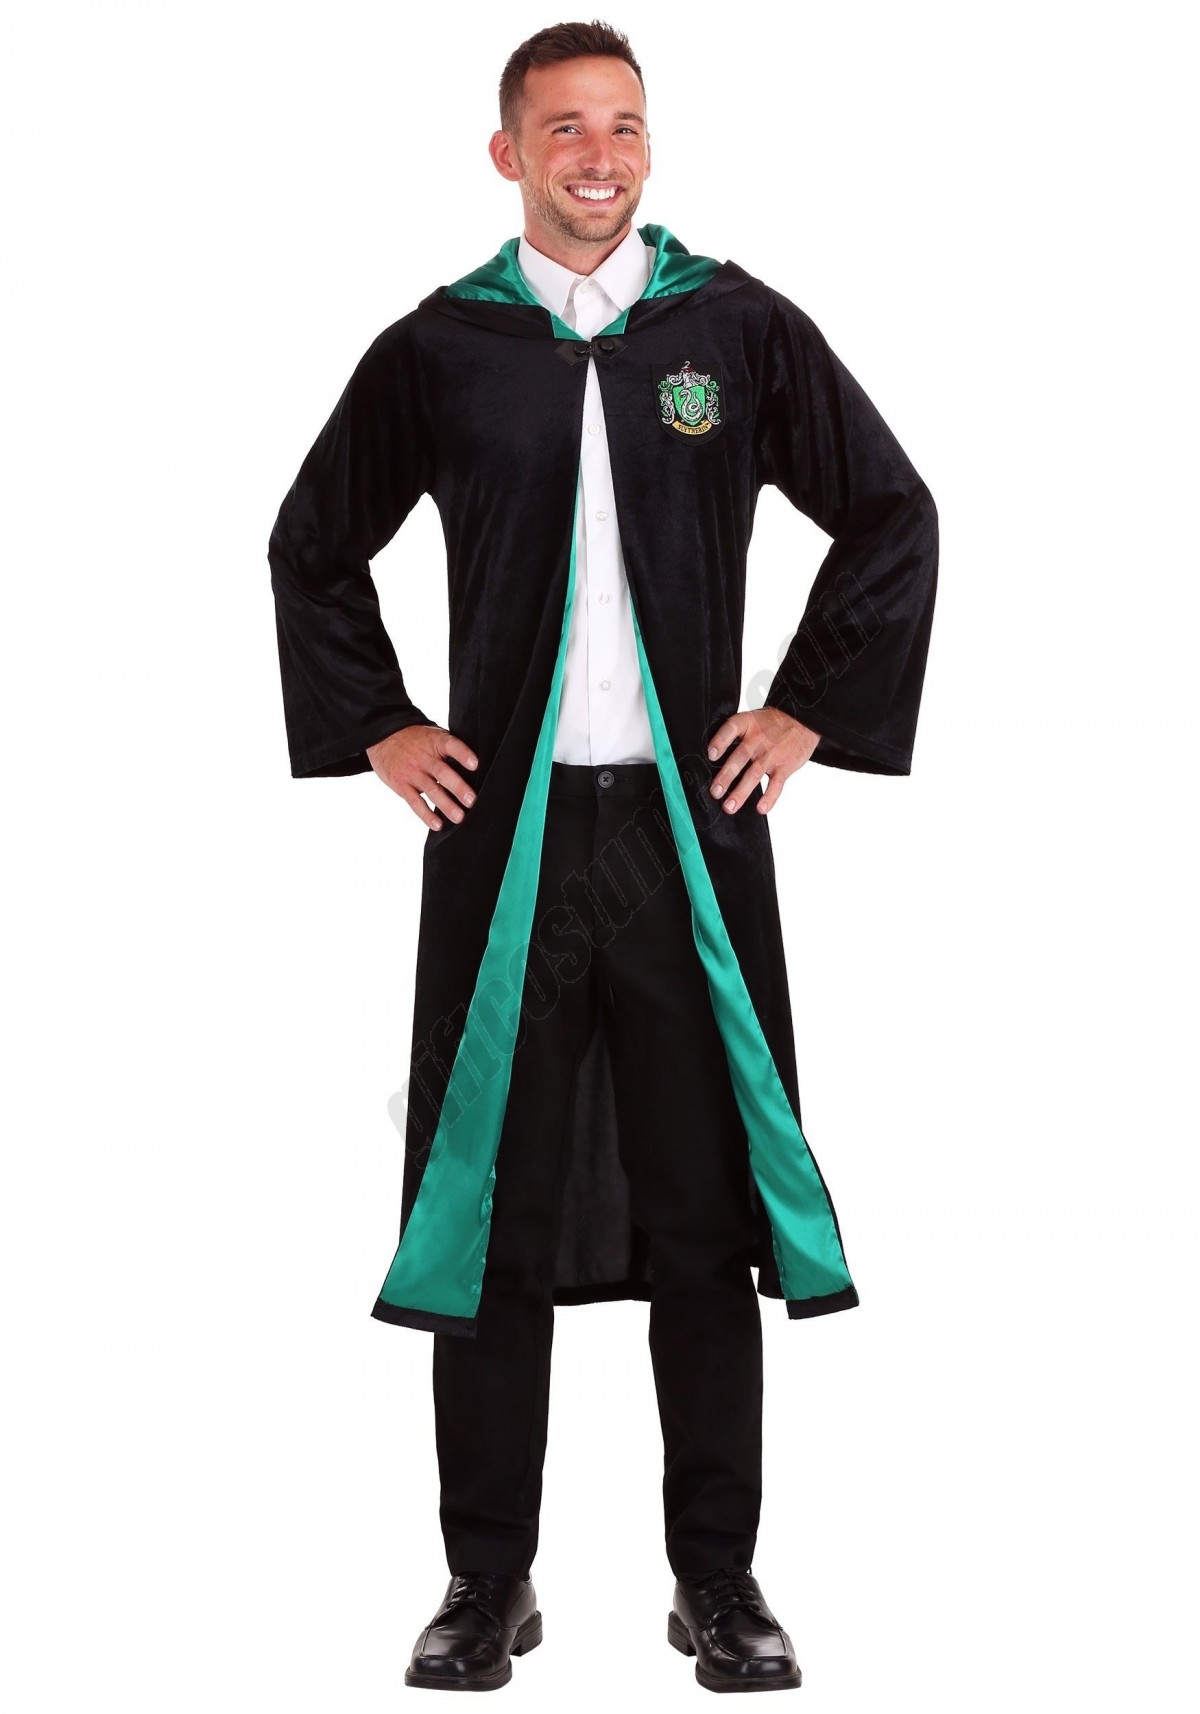 Harry Potter Deluxe Slytherin Robe Costume for Adults - Men's - -7